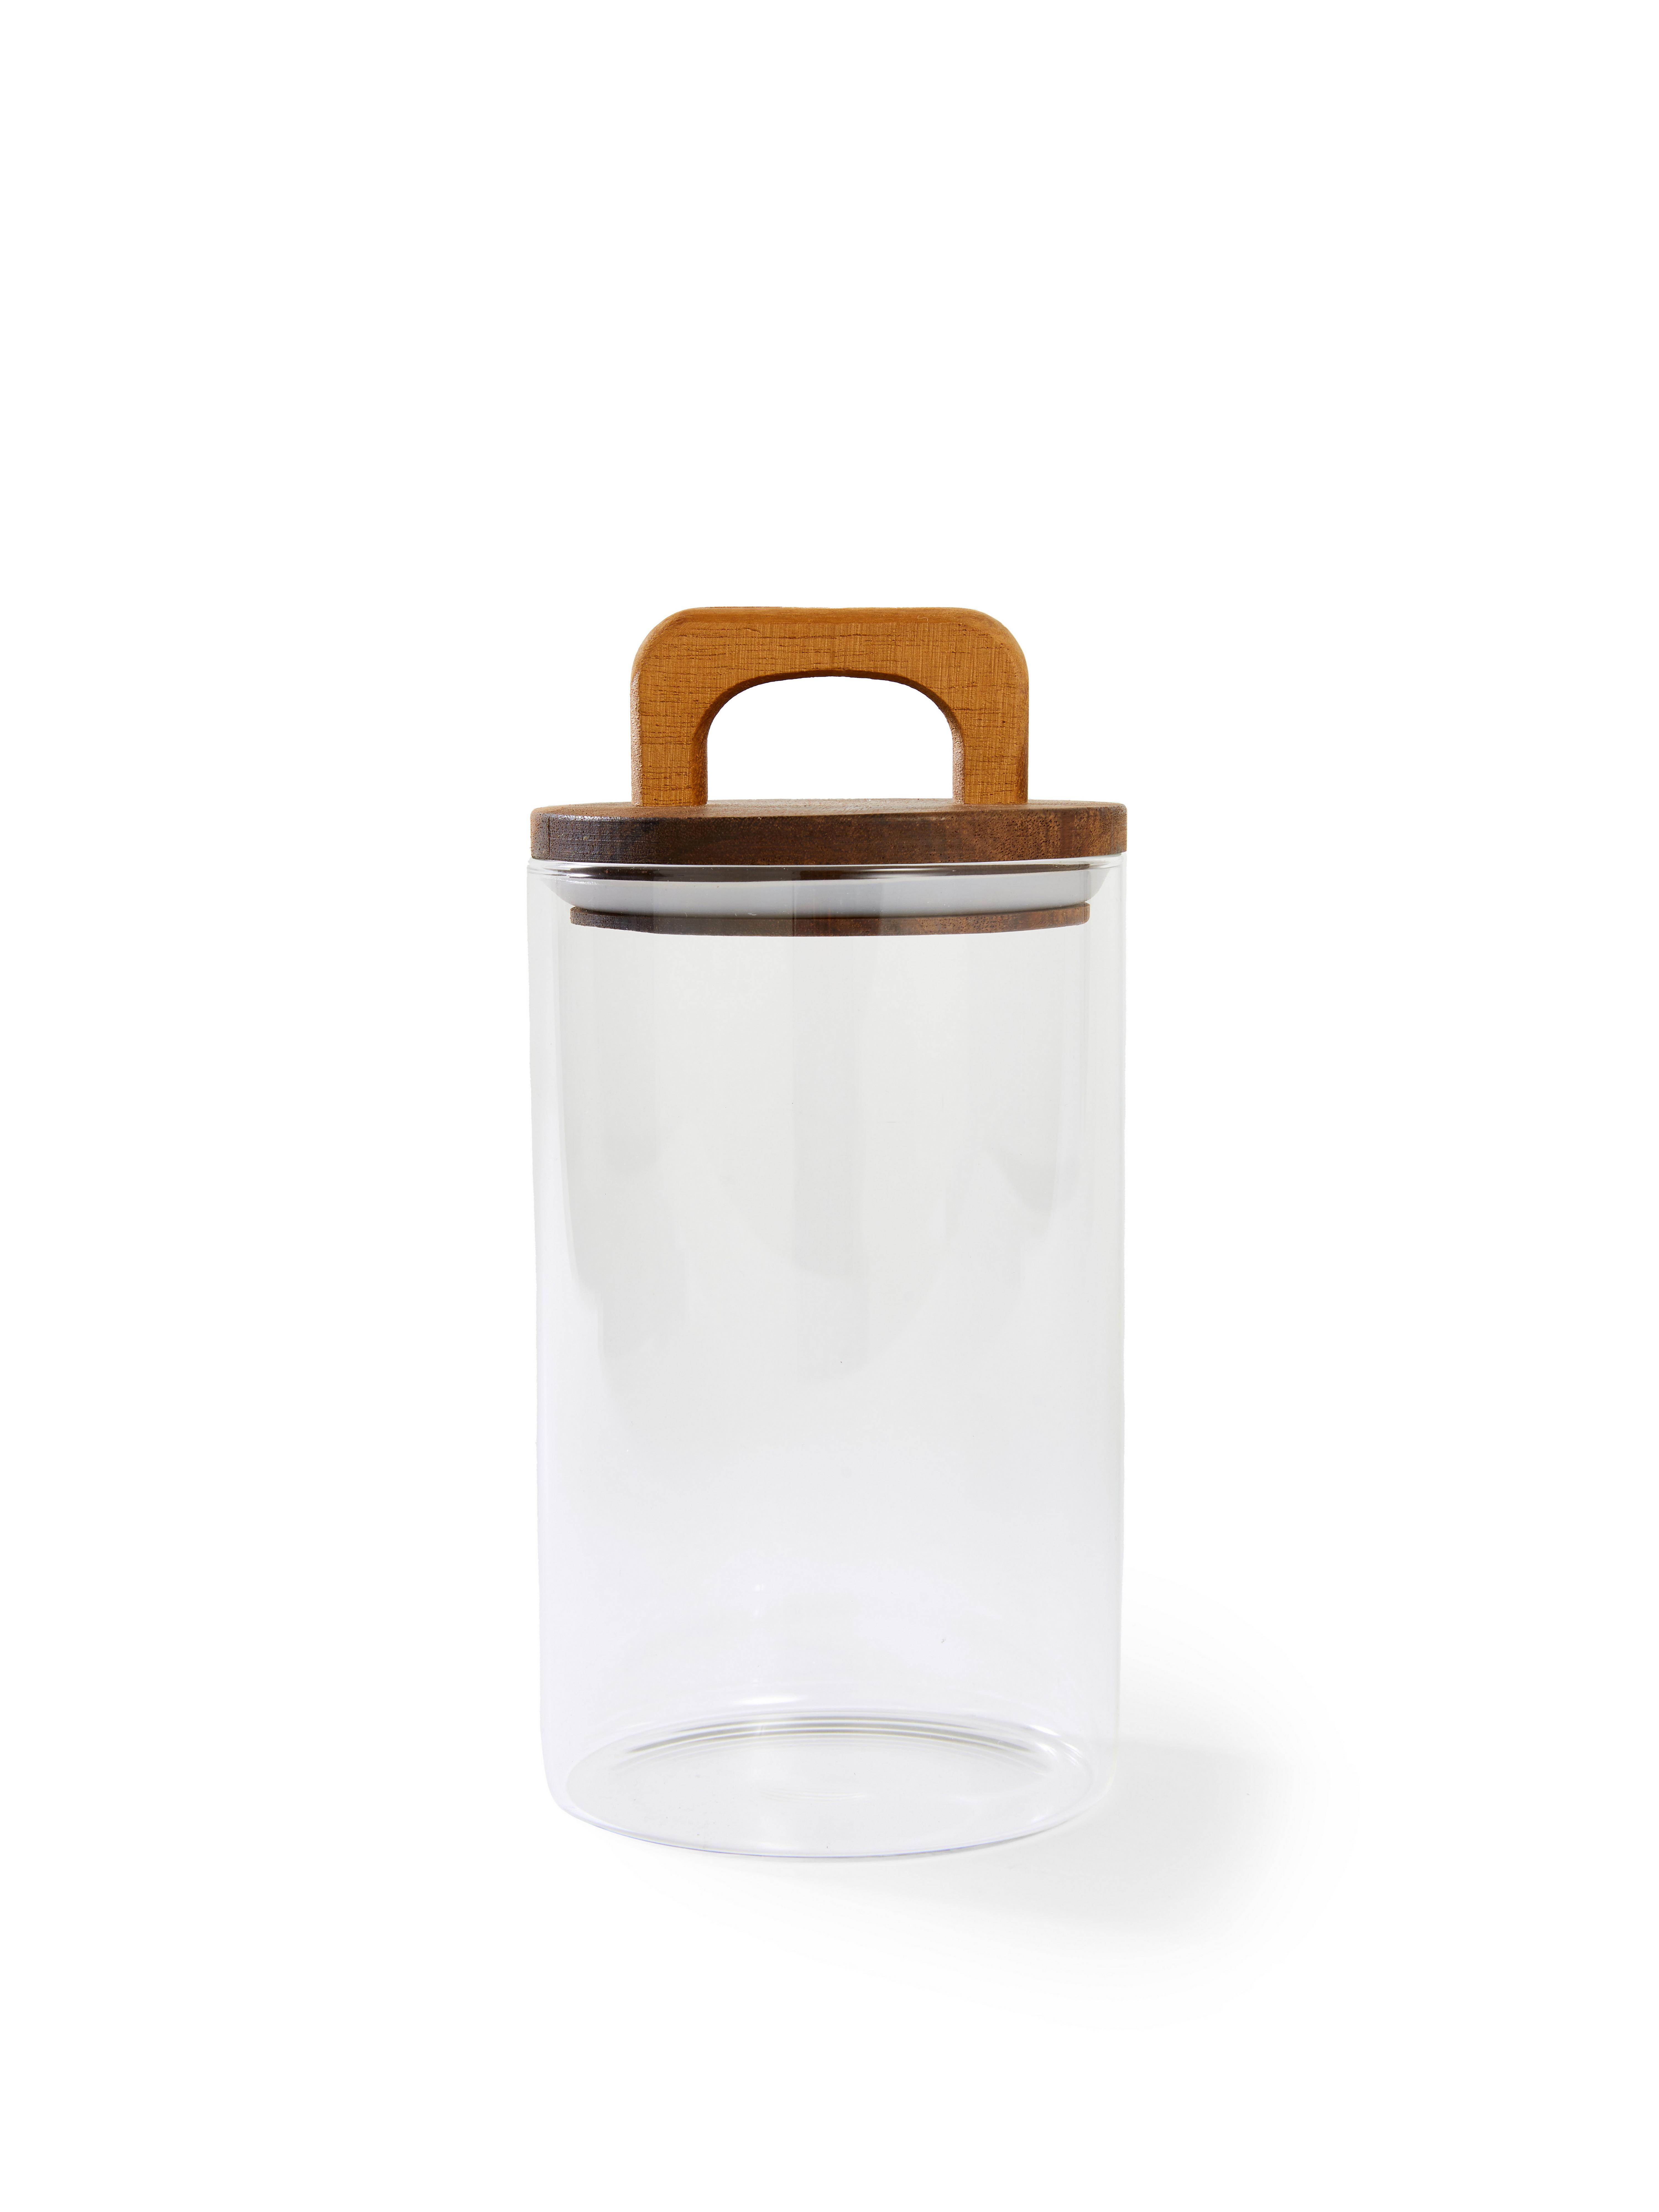 Medium Glass Canister With Wood Handle